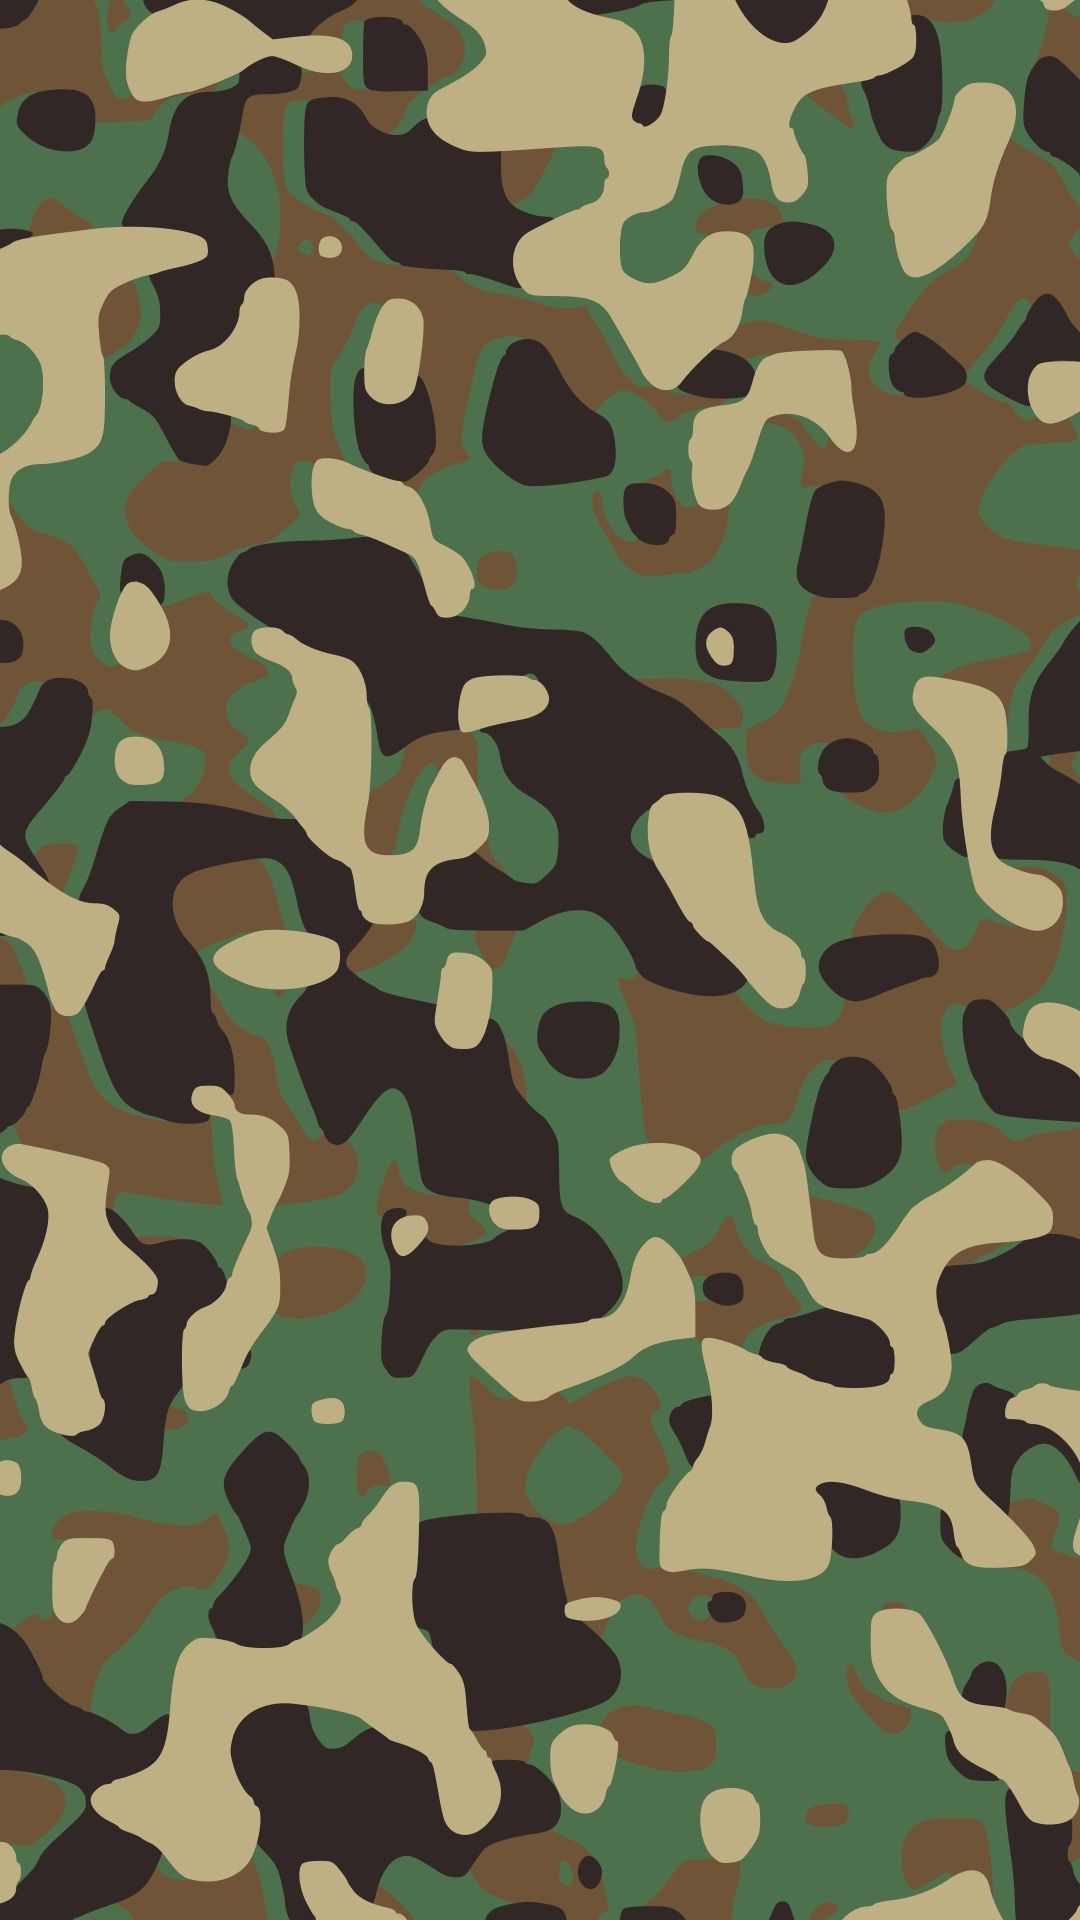 Camouflage Wallpaper For iPhone Or Android Tags Camo Hunting